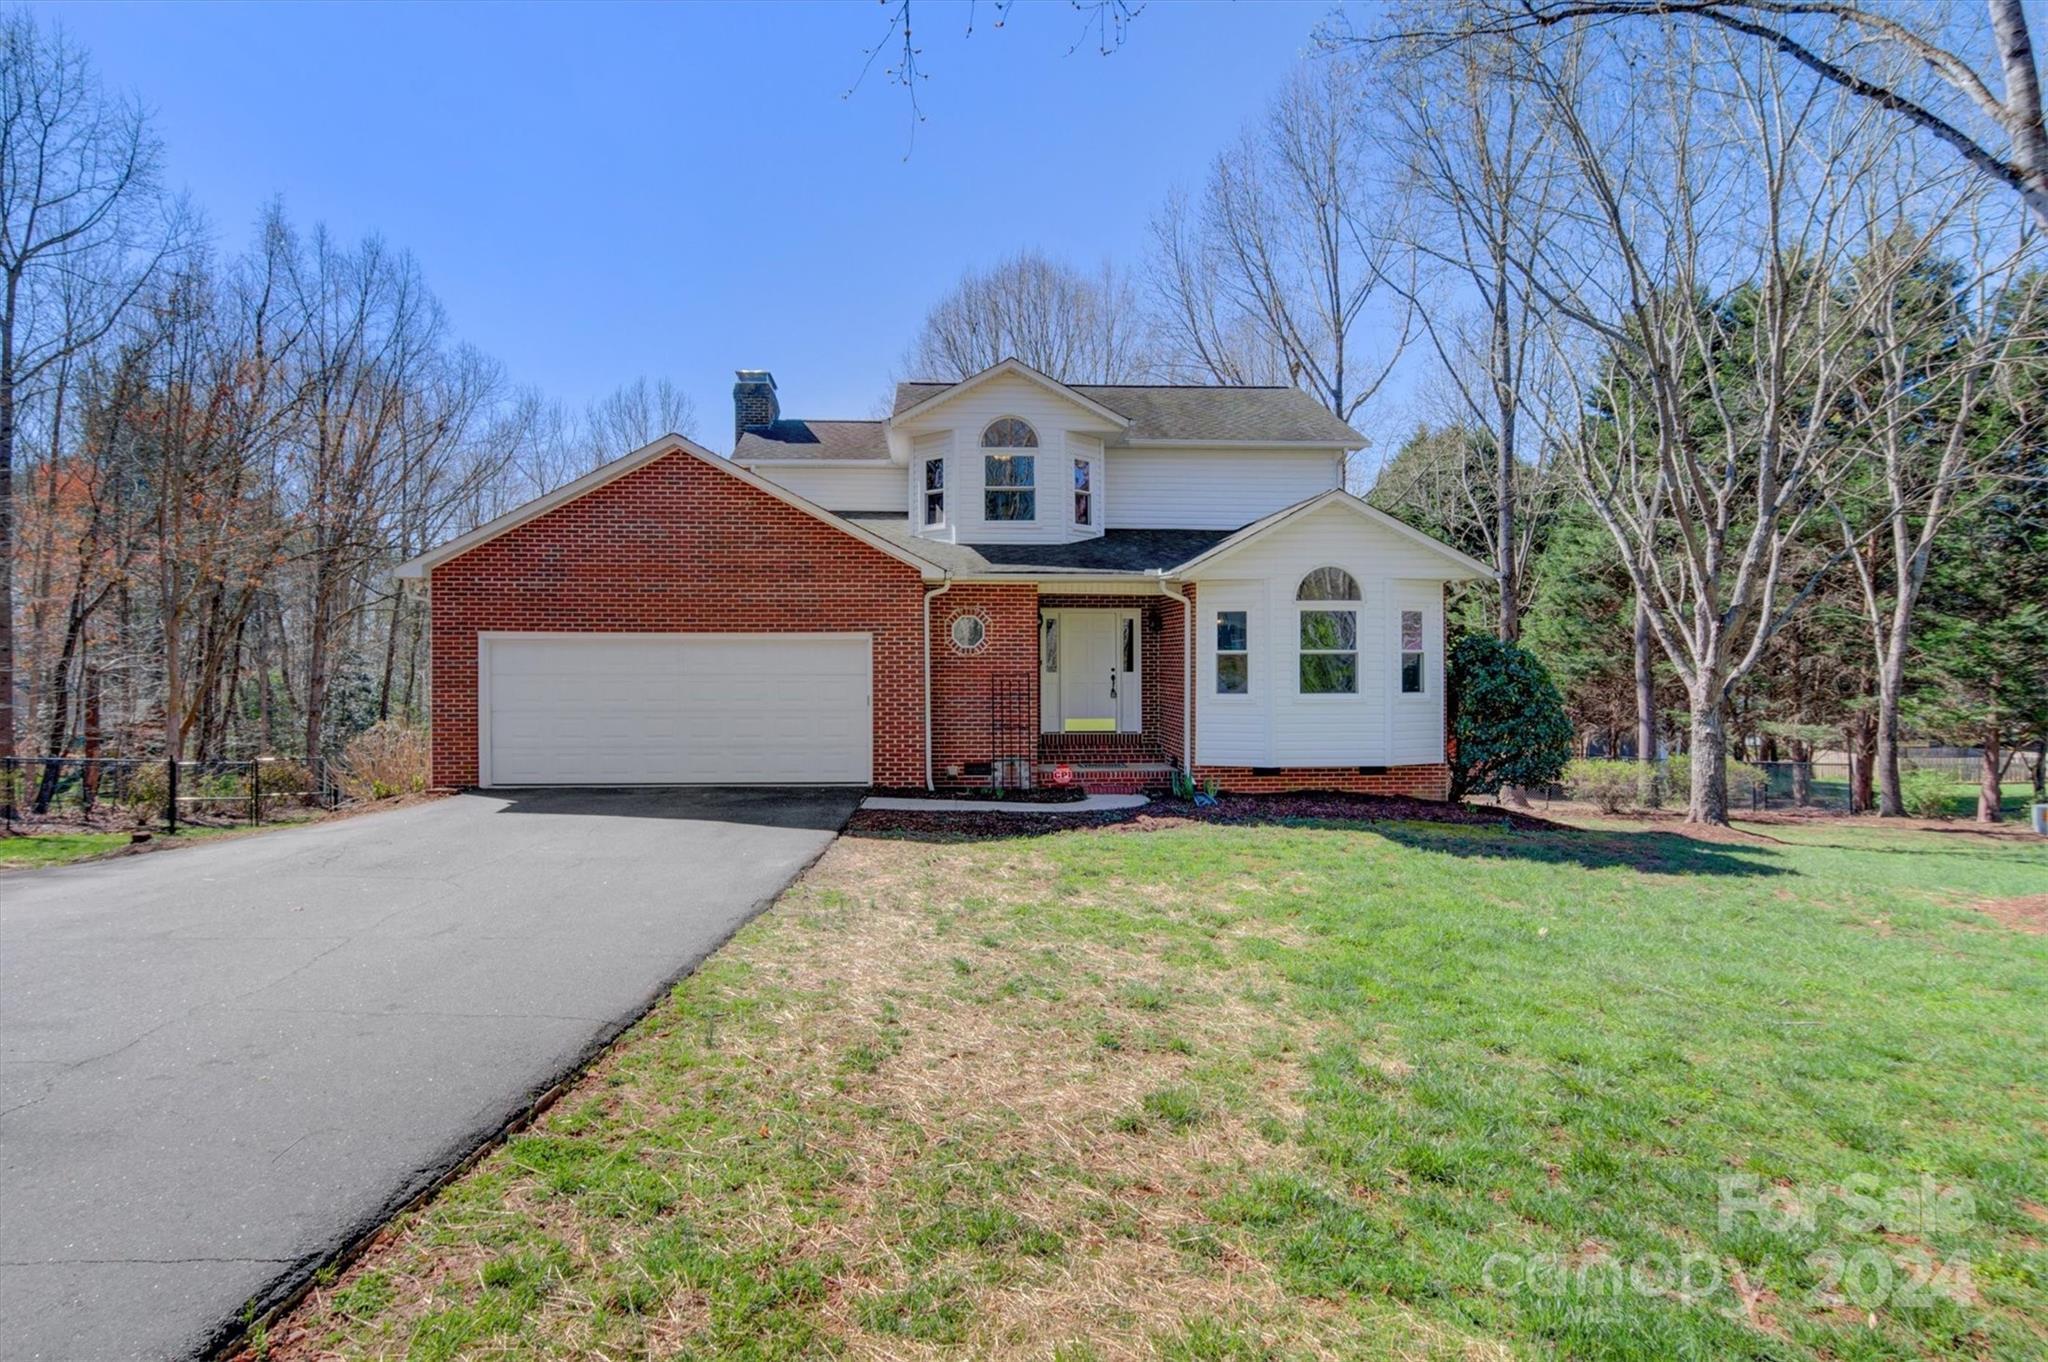 Photo one of 6541 Willowbottom Rd Hickory NC 28602 | MLS 4121346